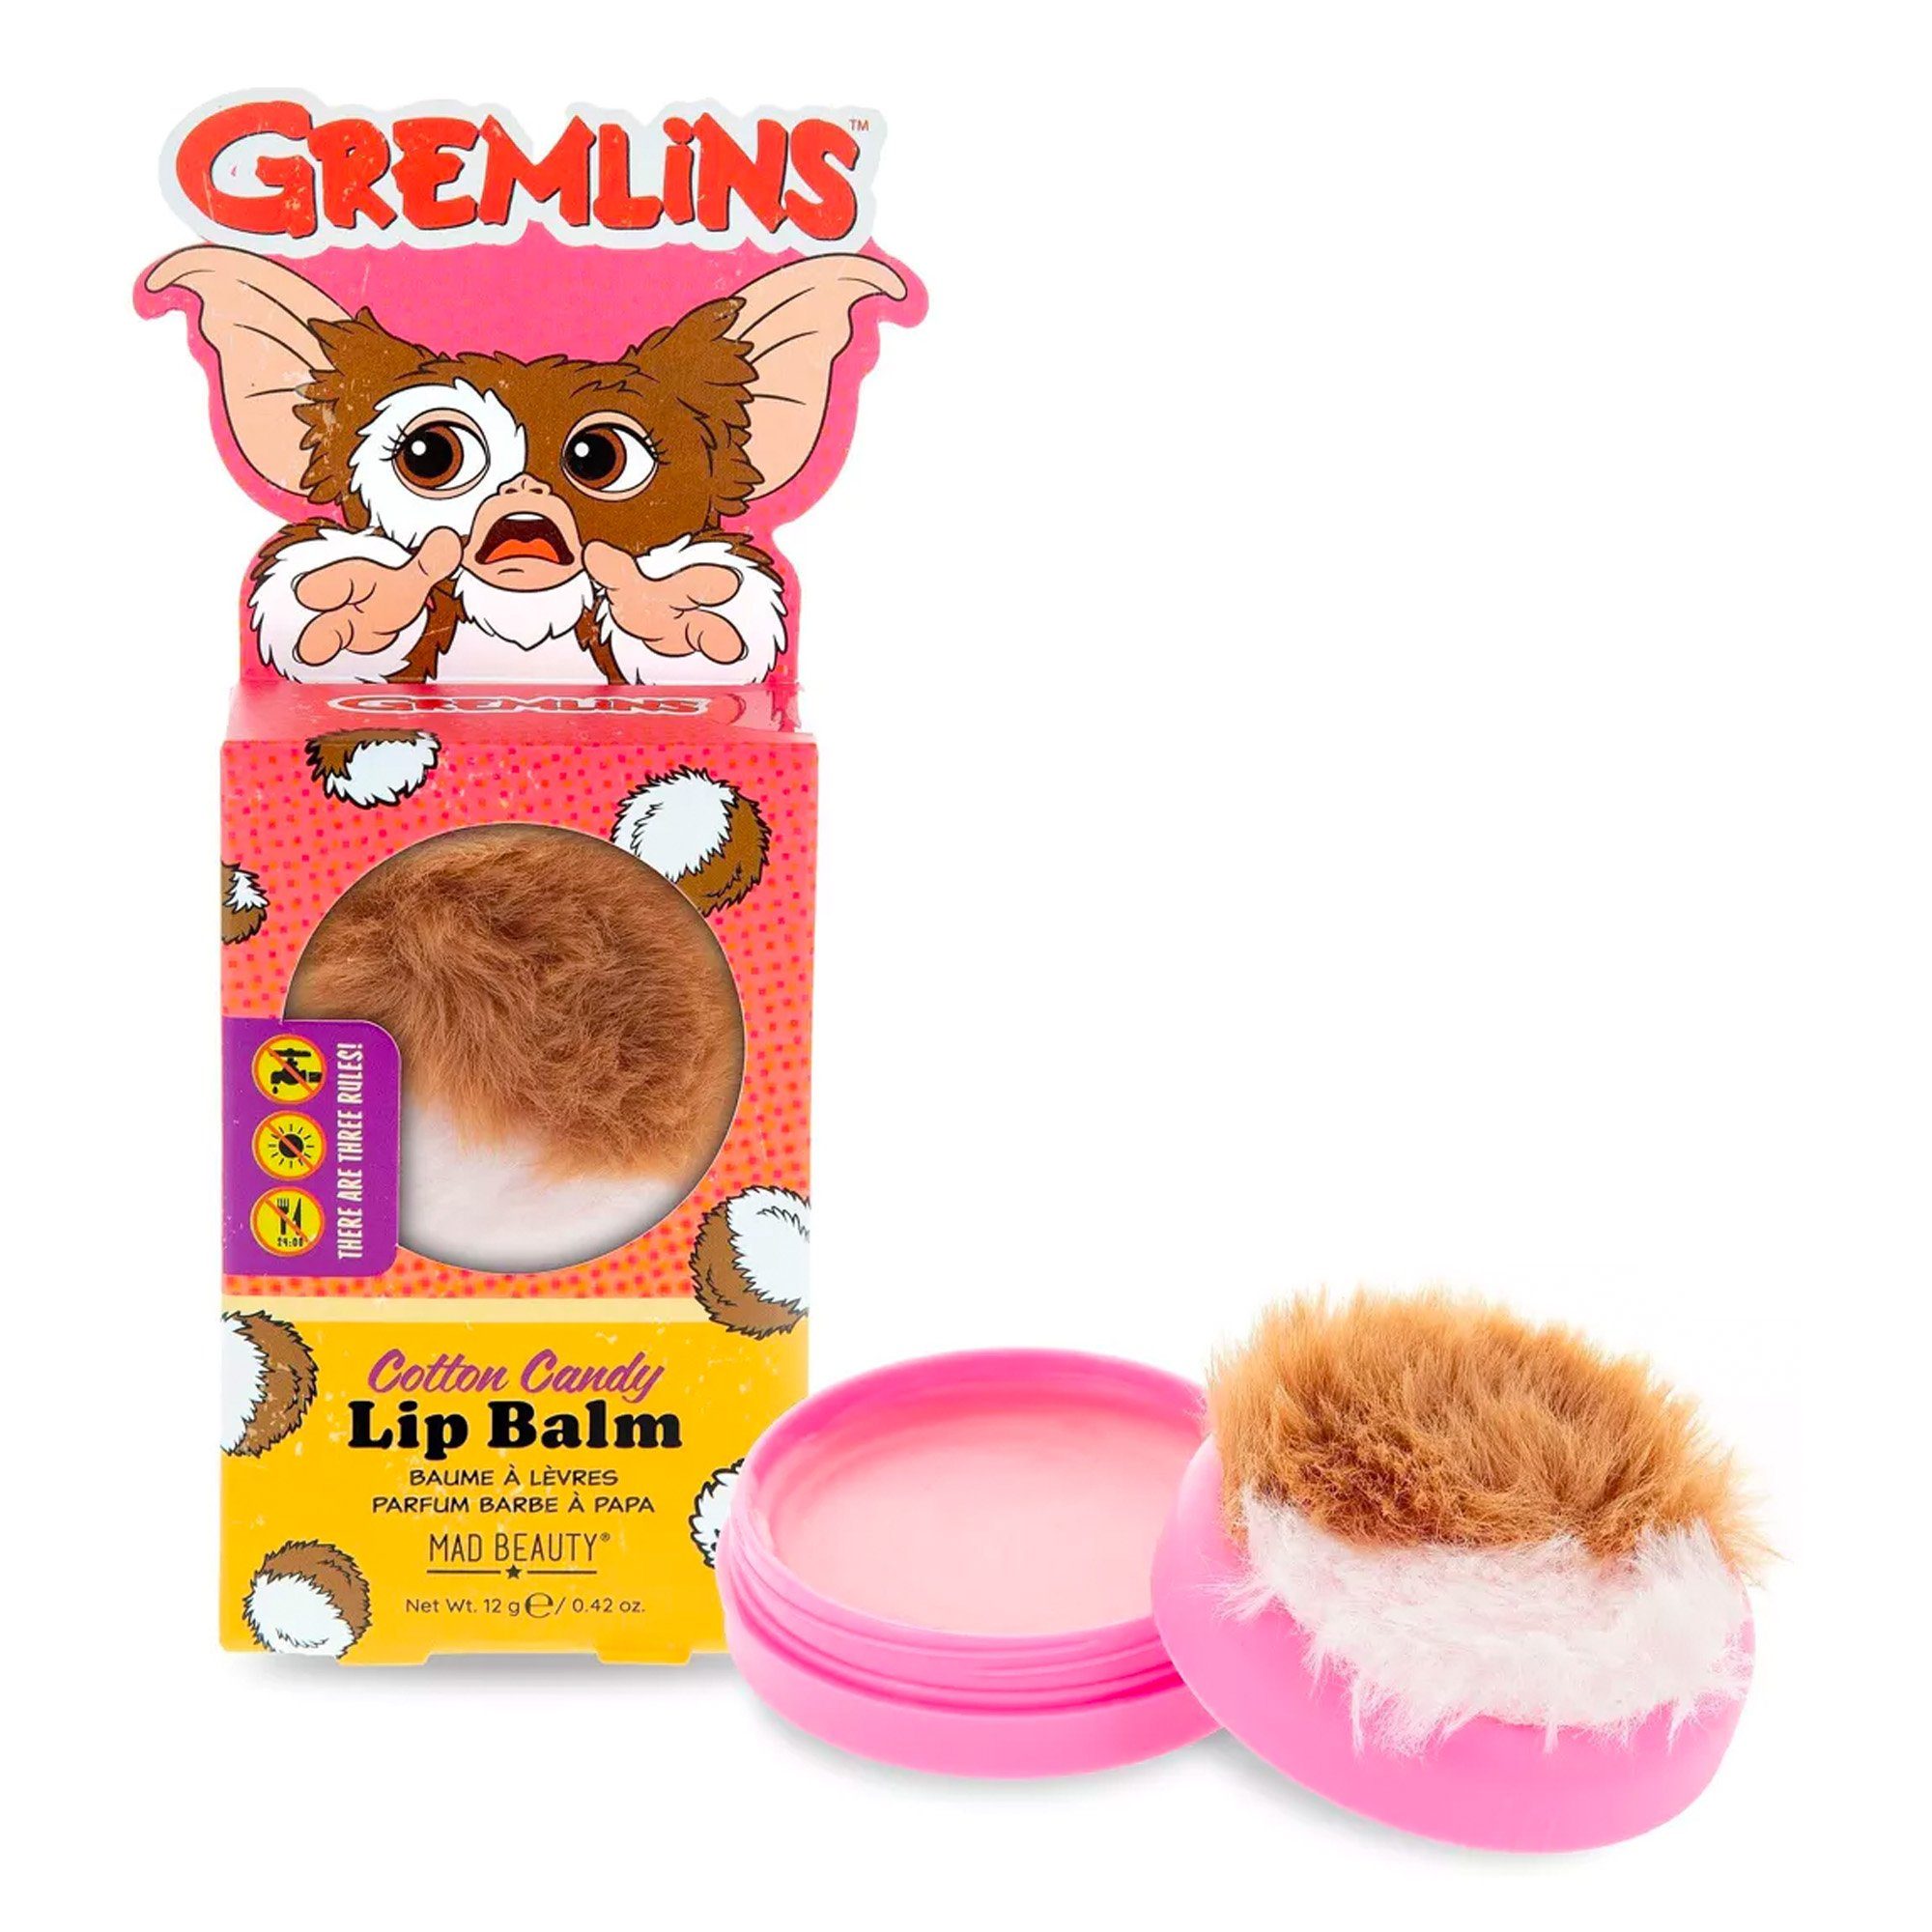 Lippenbalsam Gremlins Candy Cotton Beauty Mad